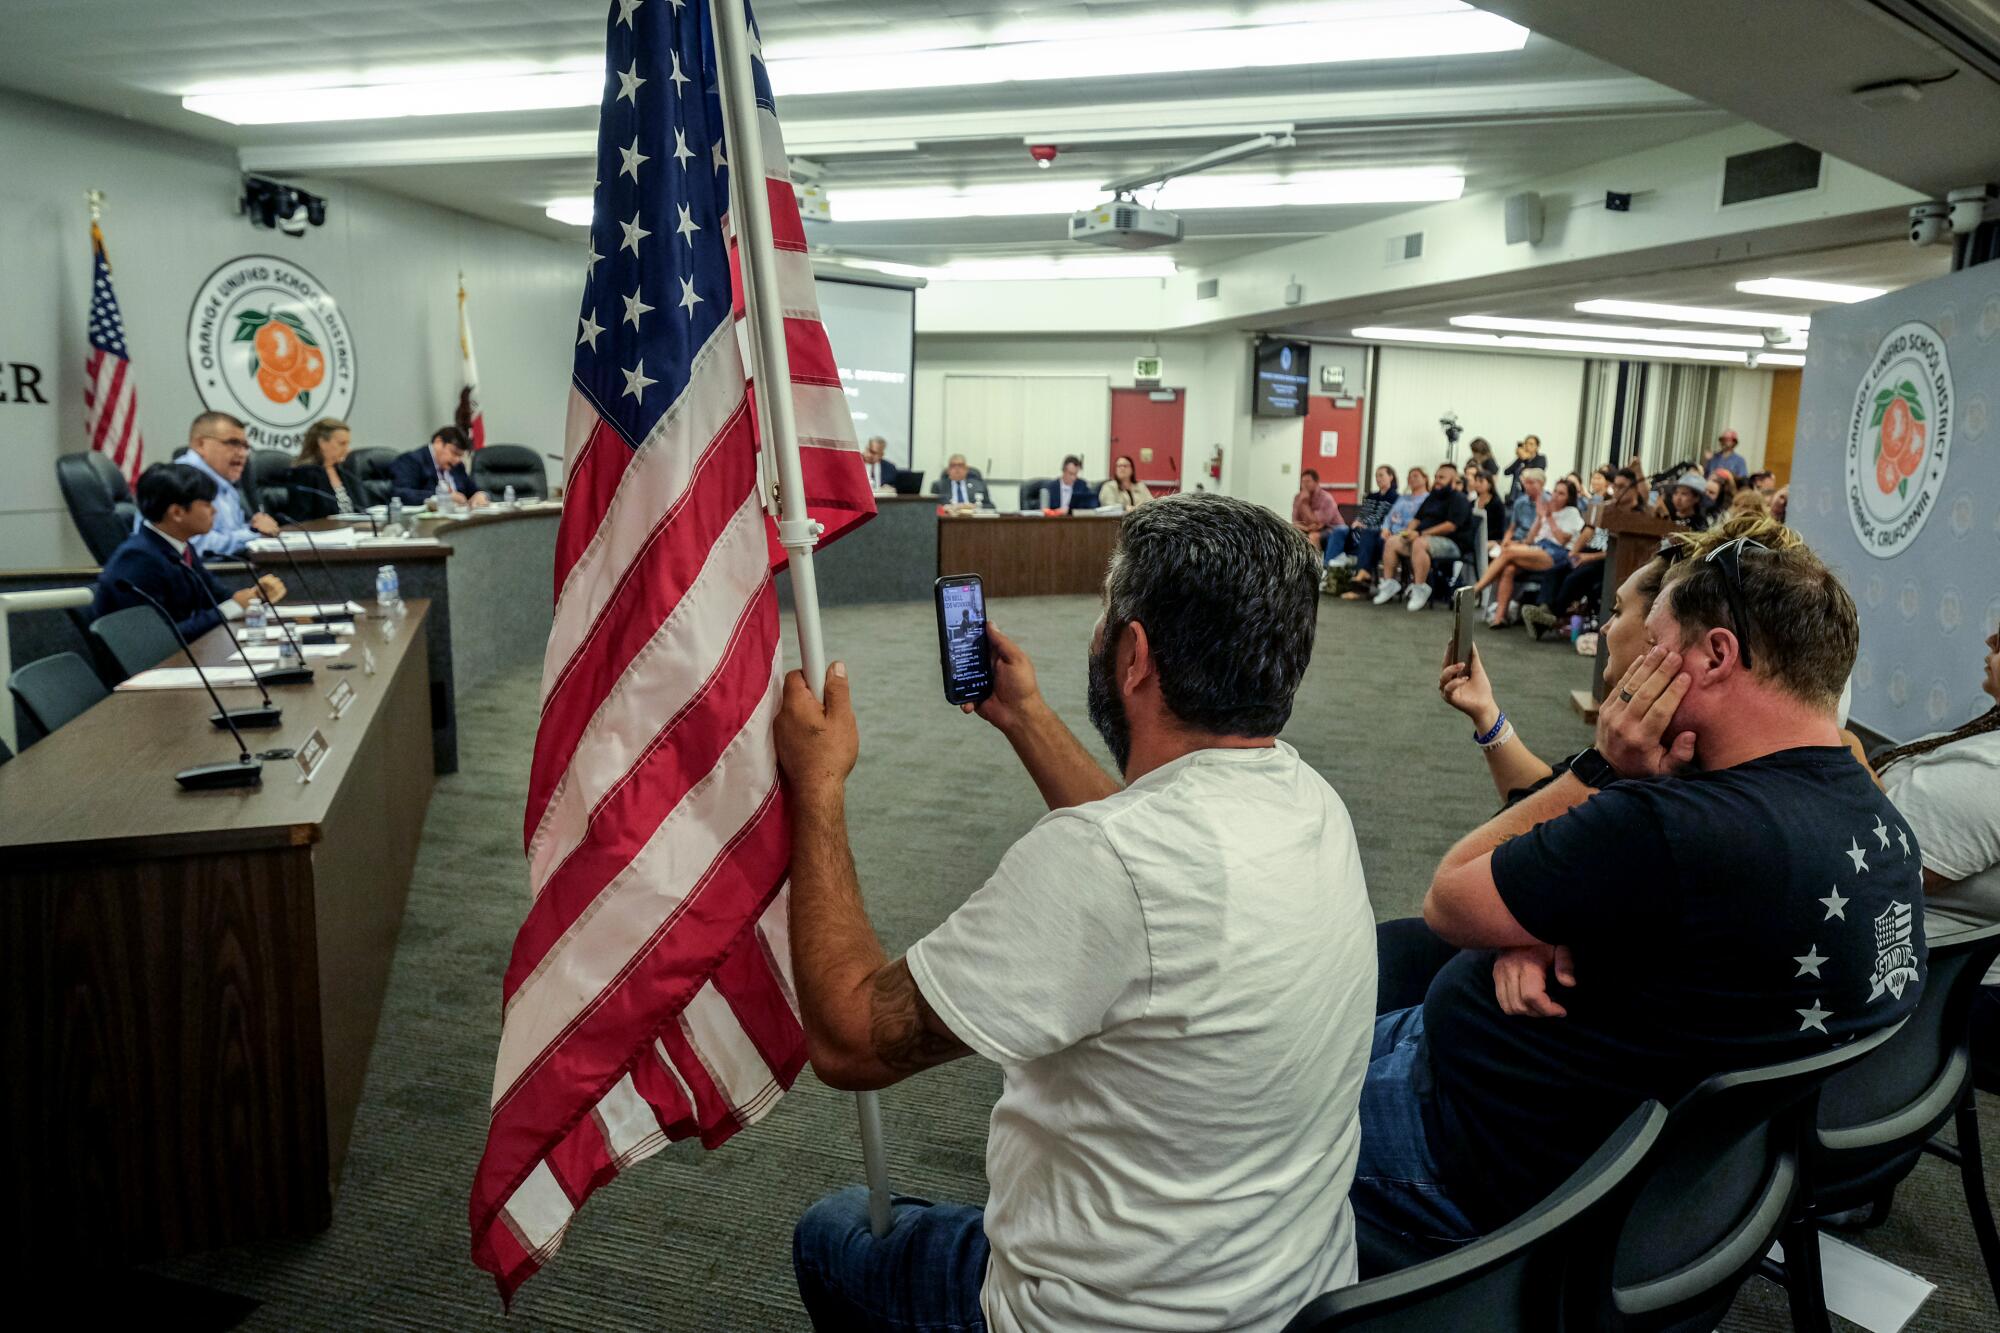 A man holds an American flag as he and another seated nearby hold up cellphones.